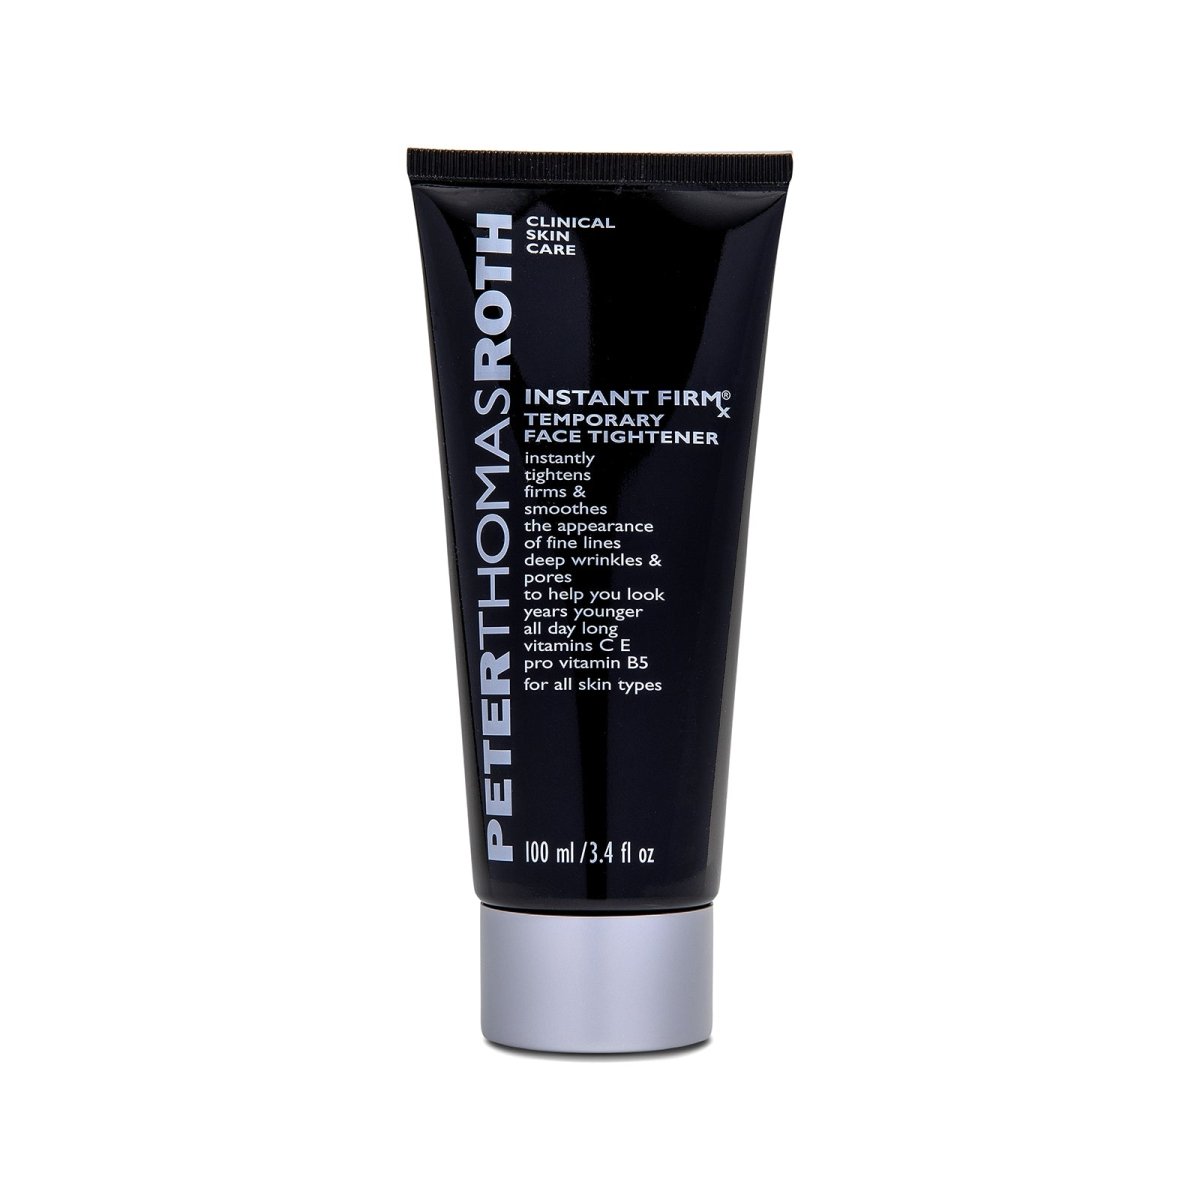 Peter Thomas Roth Instant FIRMx® Temporary Face Tightener - SkincareEssentials